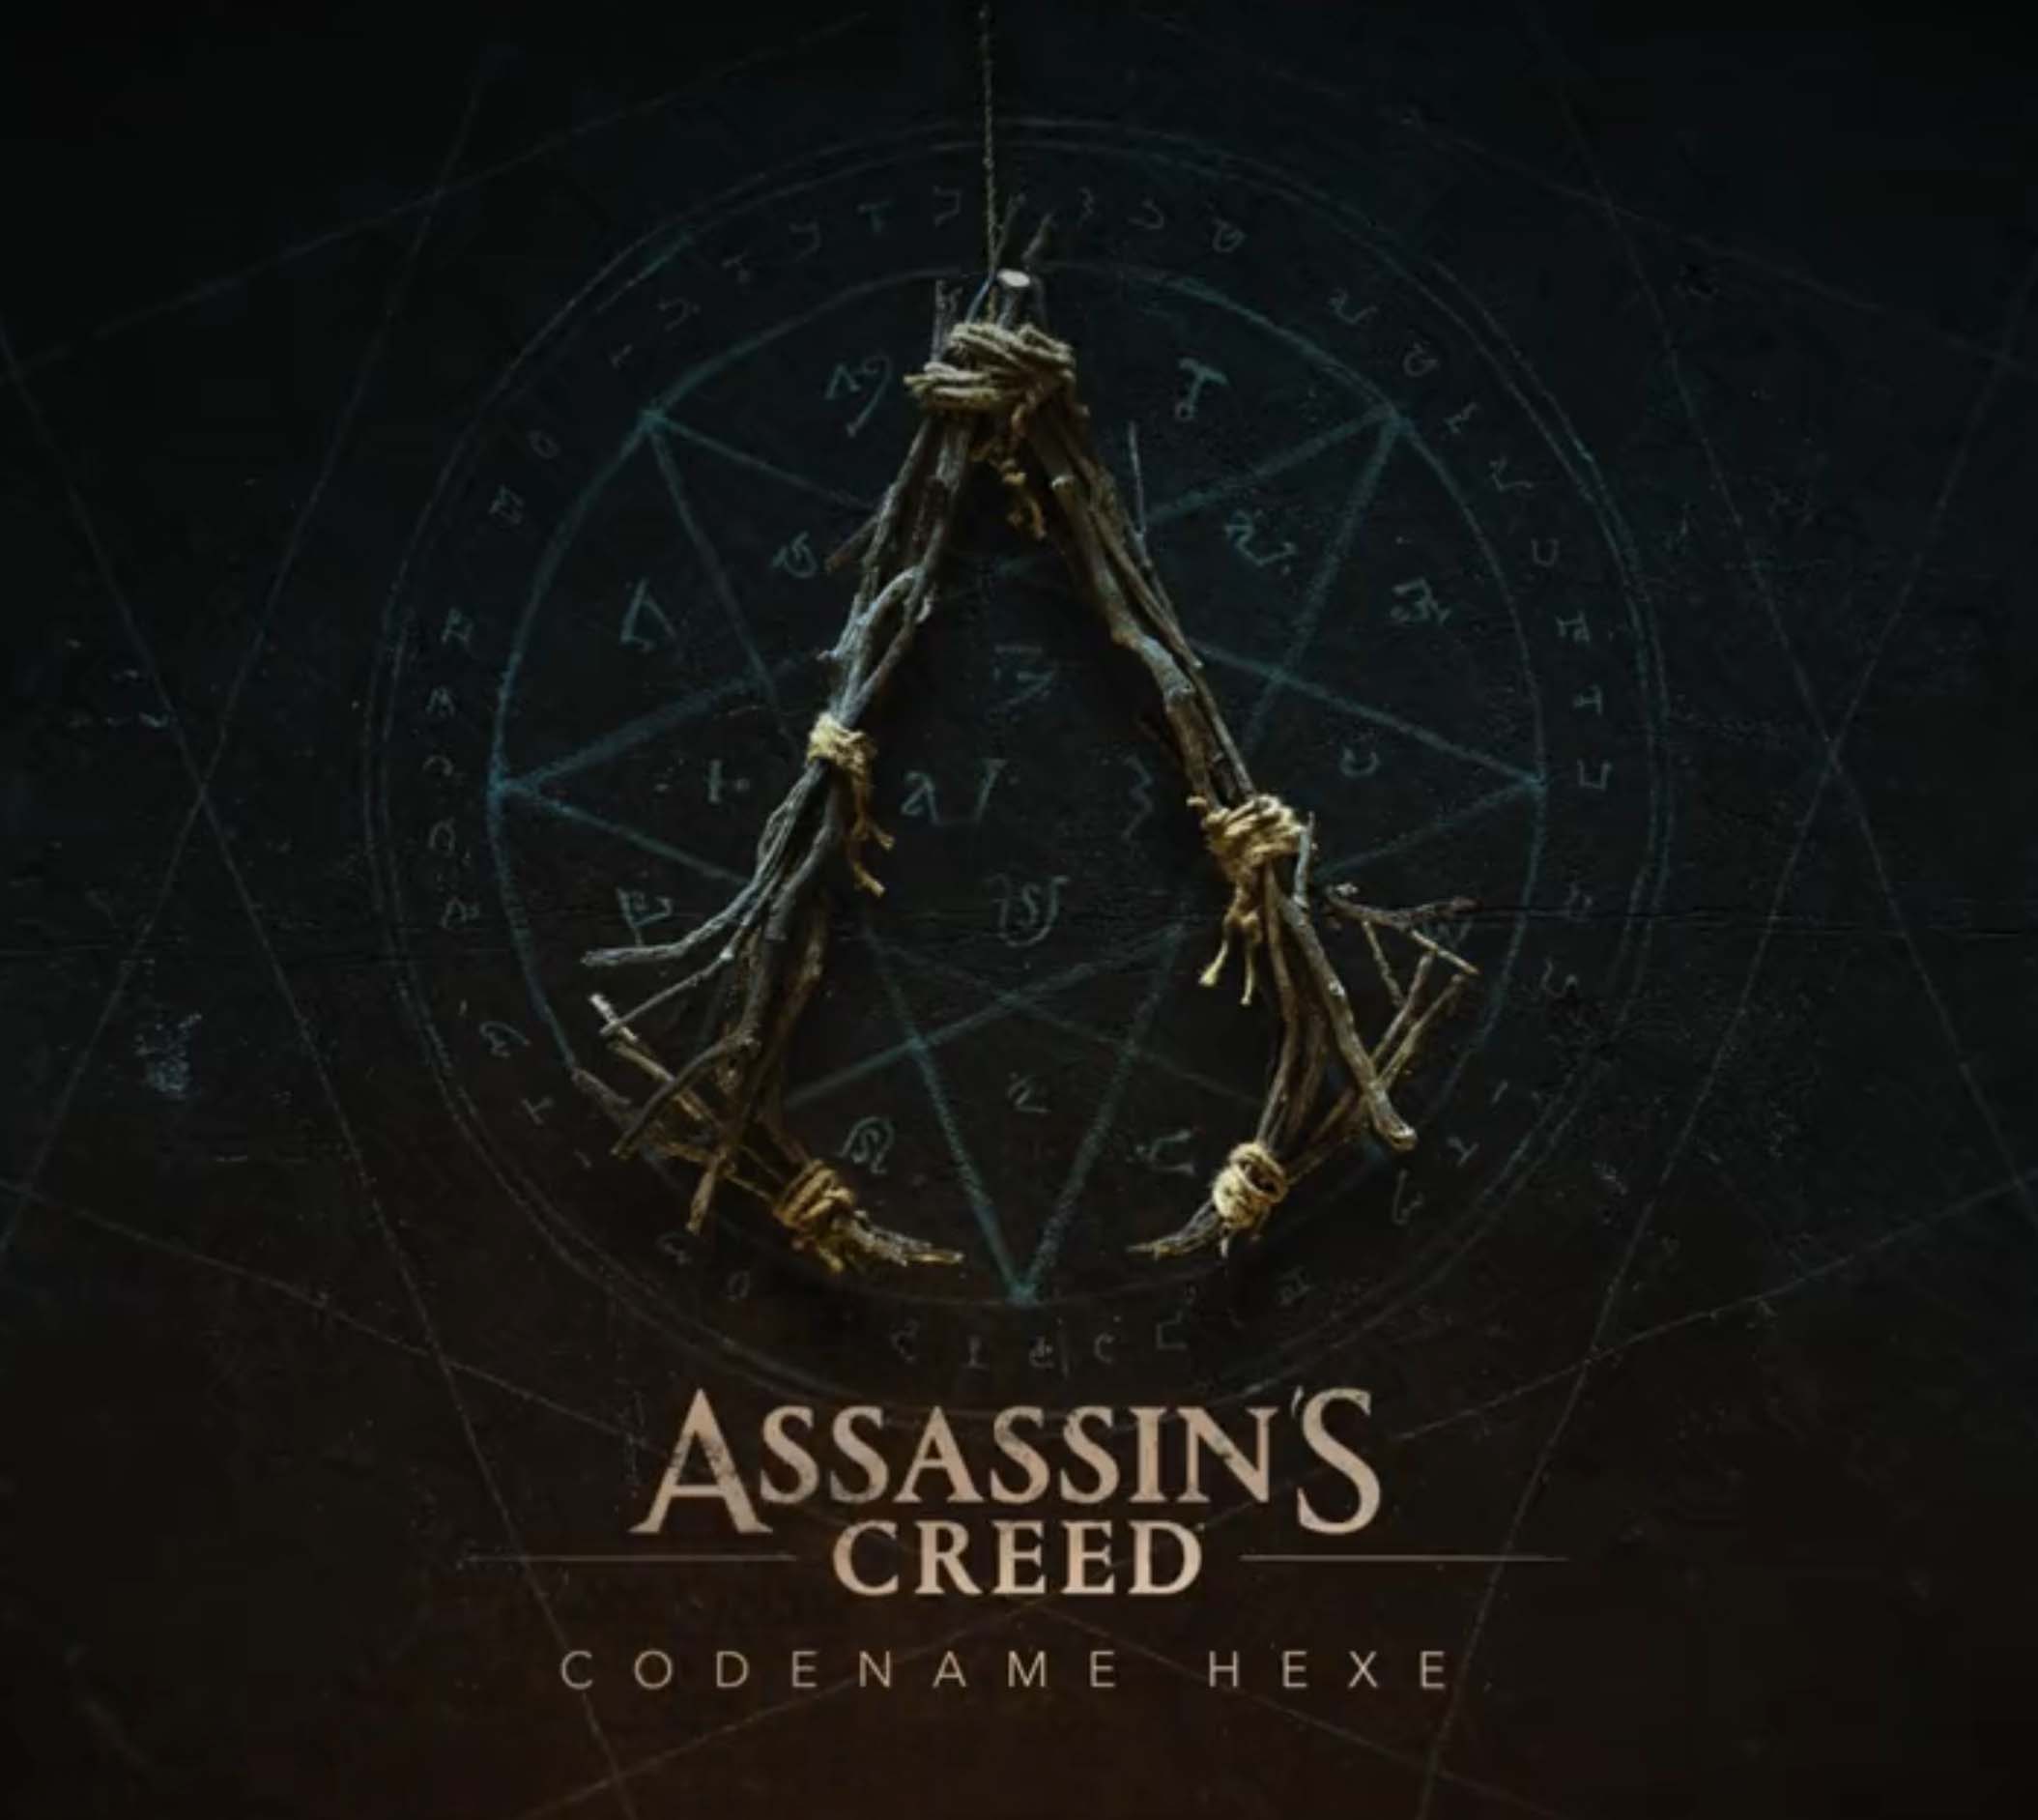 Assassins creed red дата выхода. Assassin's Creed Hexe. Ассасин Крид Hexe. Assassin’s Creed Origins обложка. Assassin’s Creed Вальгалла.